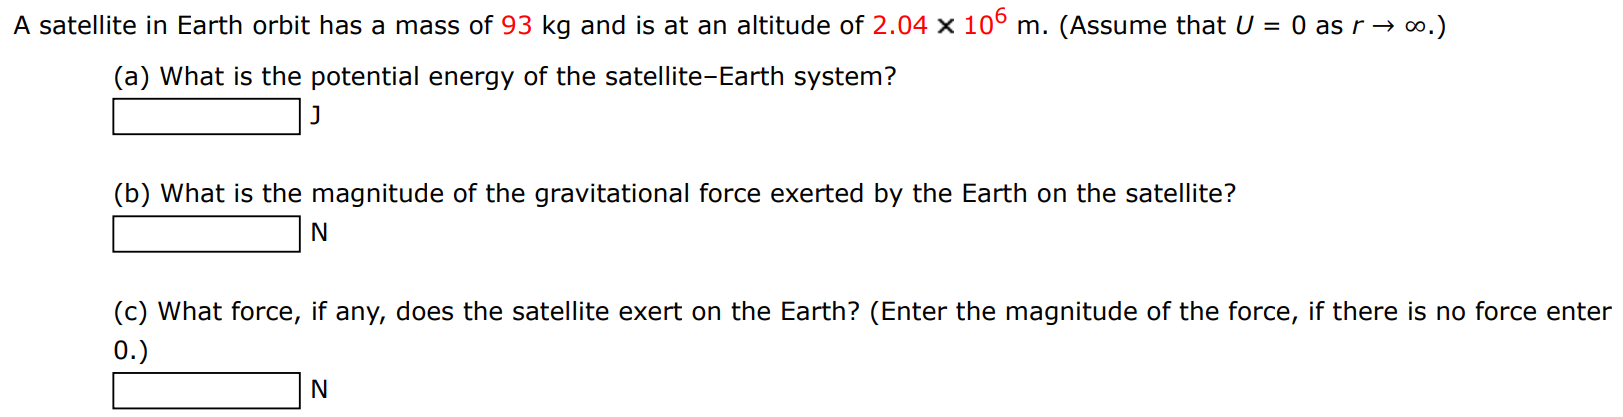 A satellite in Earth orbit has a mass of 93 kg and is at an altitude of 2.04×106 m. (Assume that U = 0 as r → ∞. ) (a) What is the potential energy of the satellite-Earth system? J (b) What is the magnitude of the gravitational force exerted by the Earth on the satellite? N (c) What force, if any, does the satellite exert on the Earth? (Enter the magnitude of the force, if there is no force enter 0.) N 